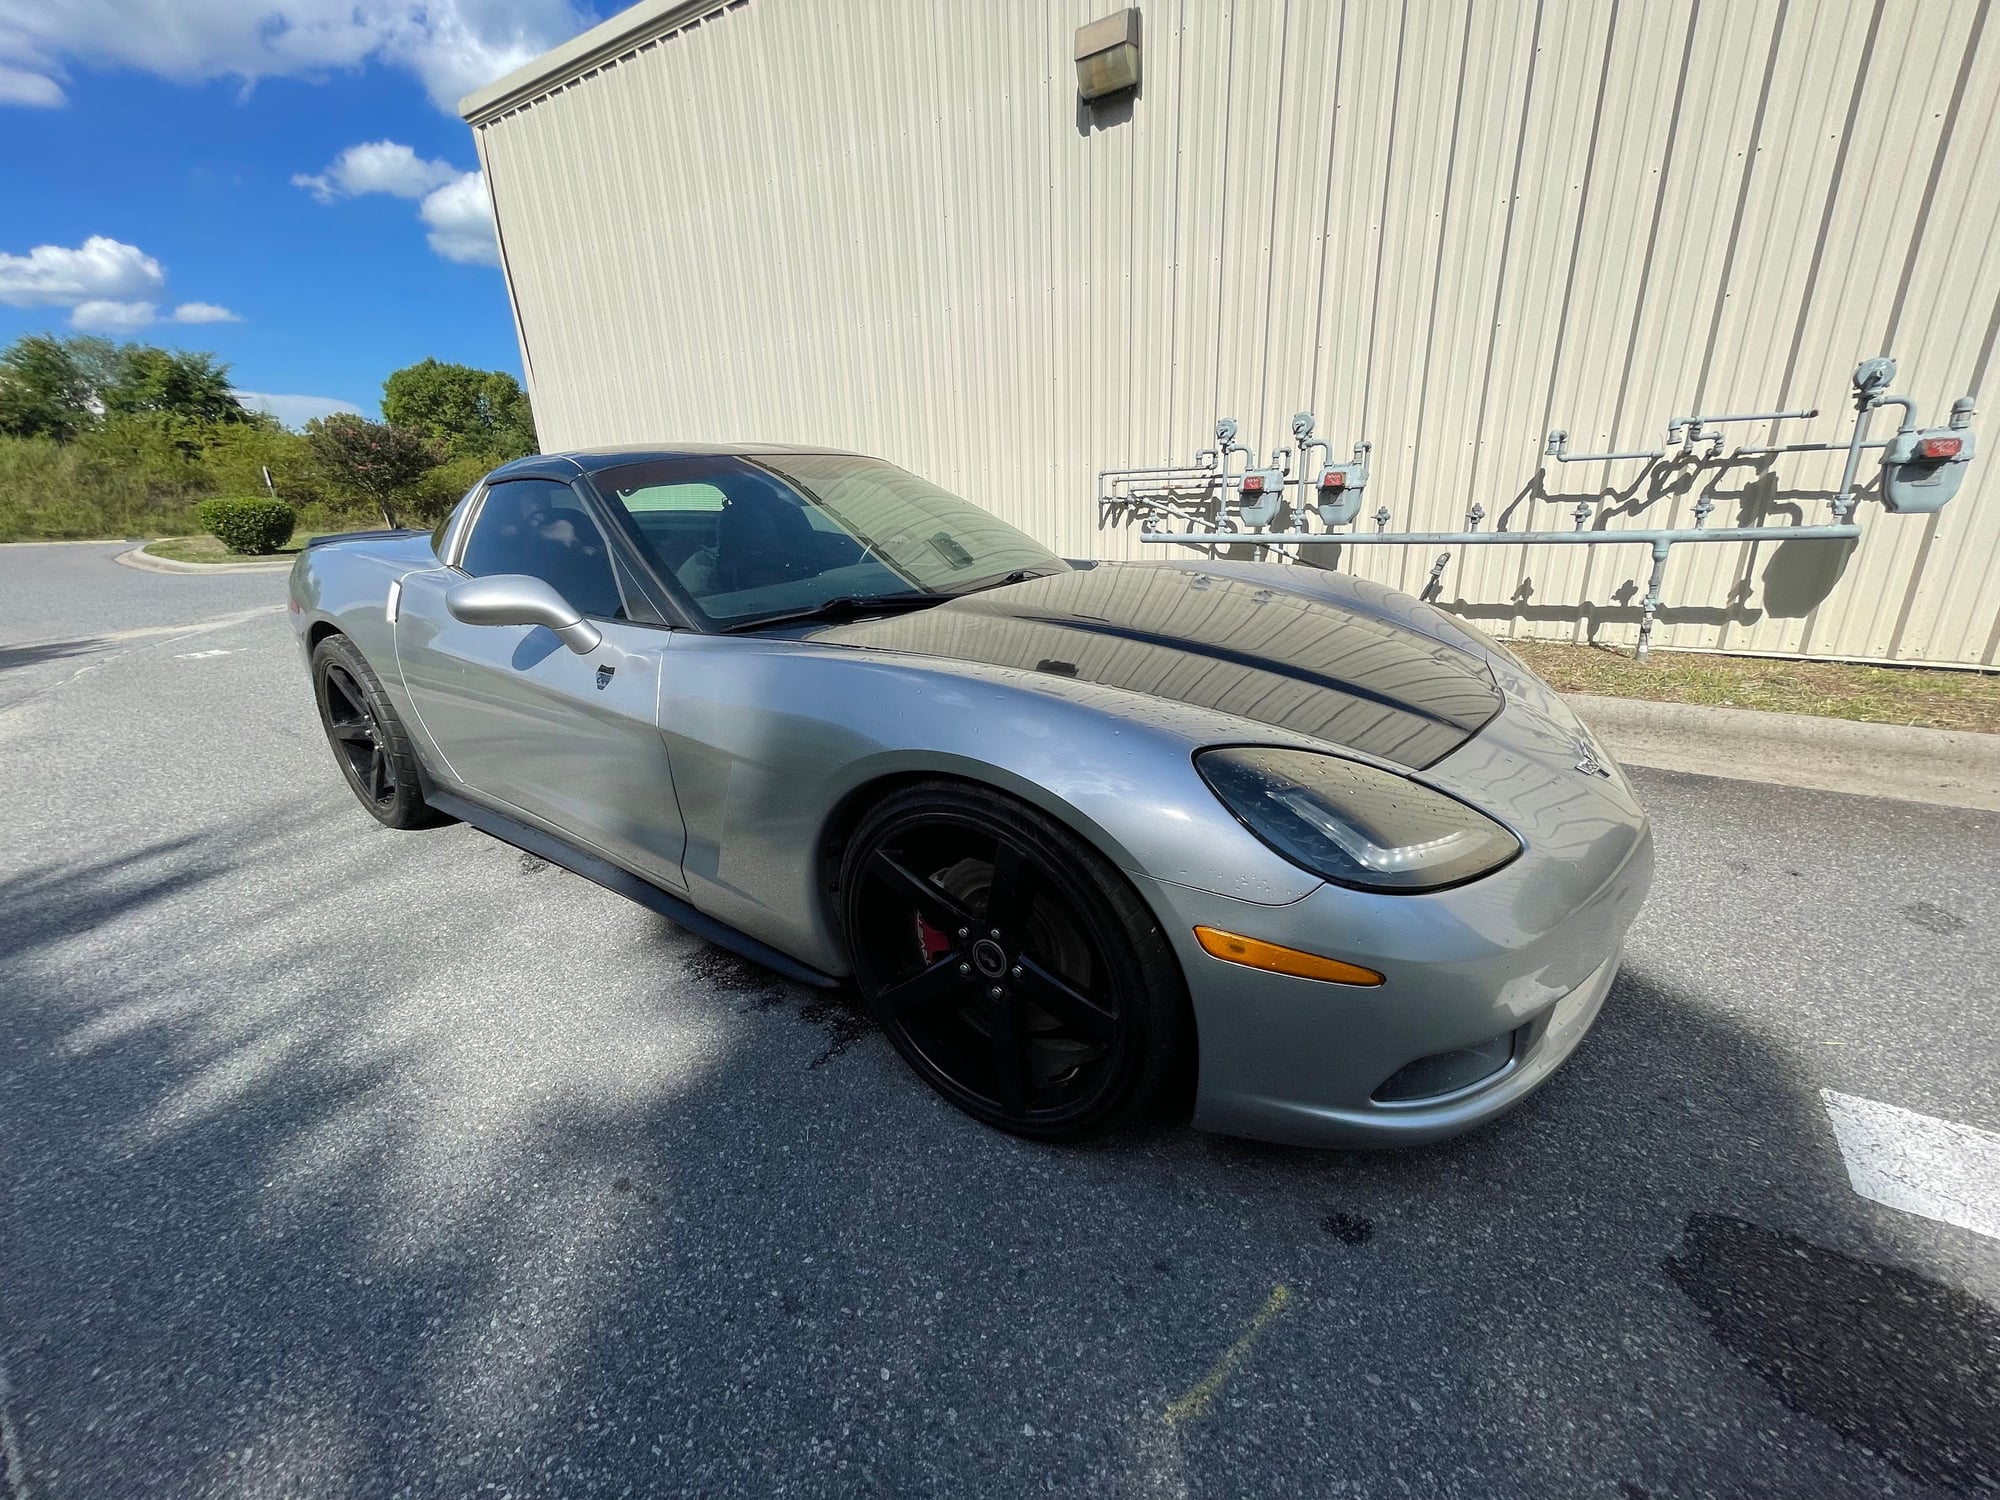 2006 Chevrolet Corvette - 2006 Chevrolet Corvette, needs work - Used - VIN 1G1YY26U065115493 - 124,993 Miles - 8 cyl - 2WD - Automatic - Coupe - Silver - Concord, NC 28027, United States